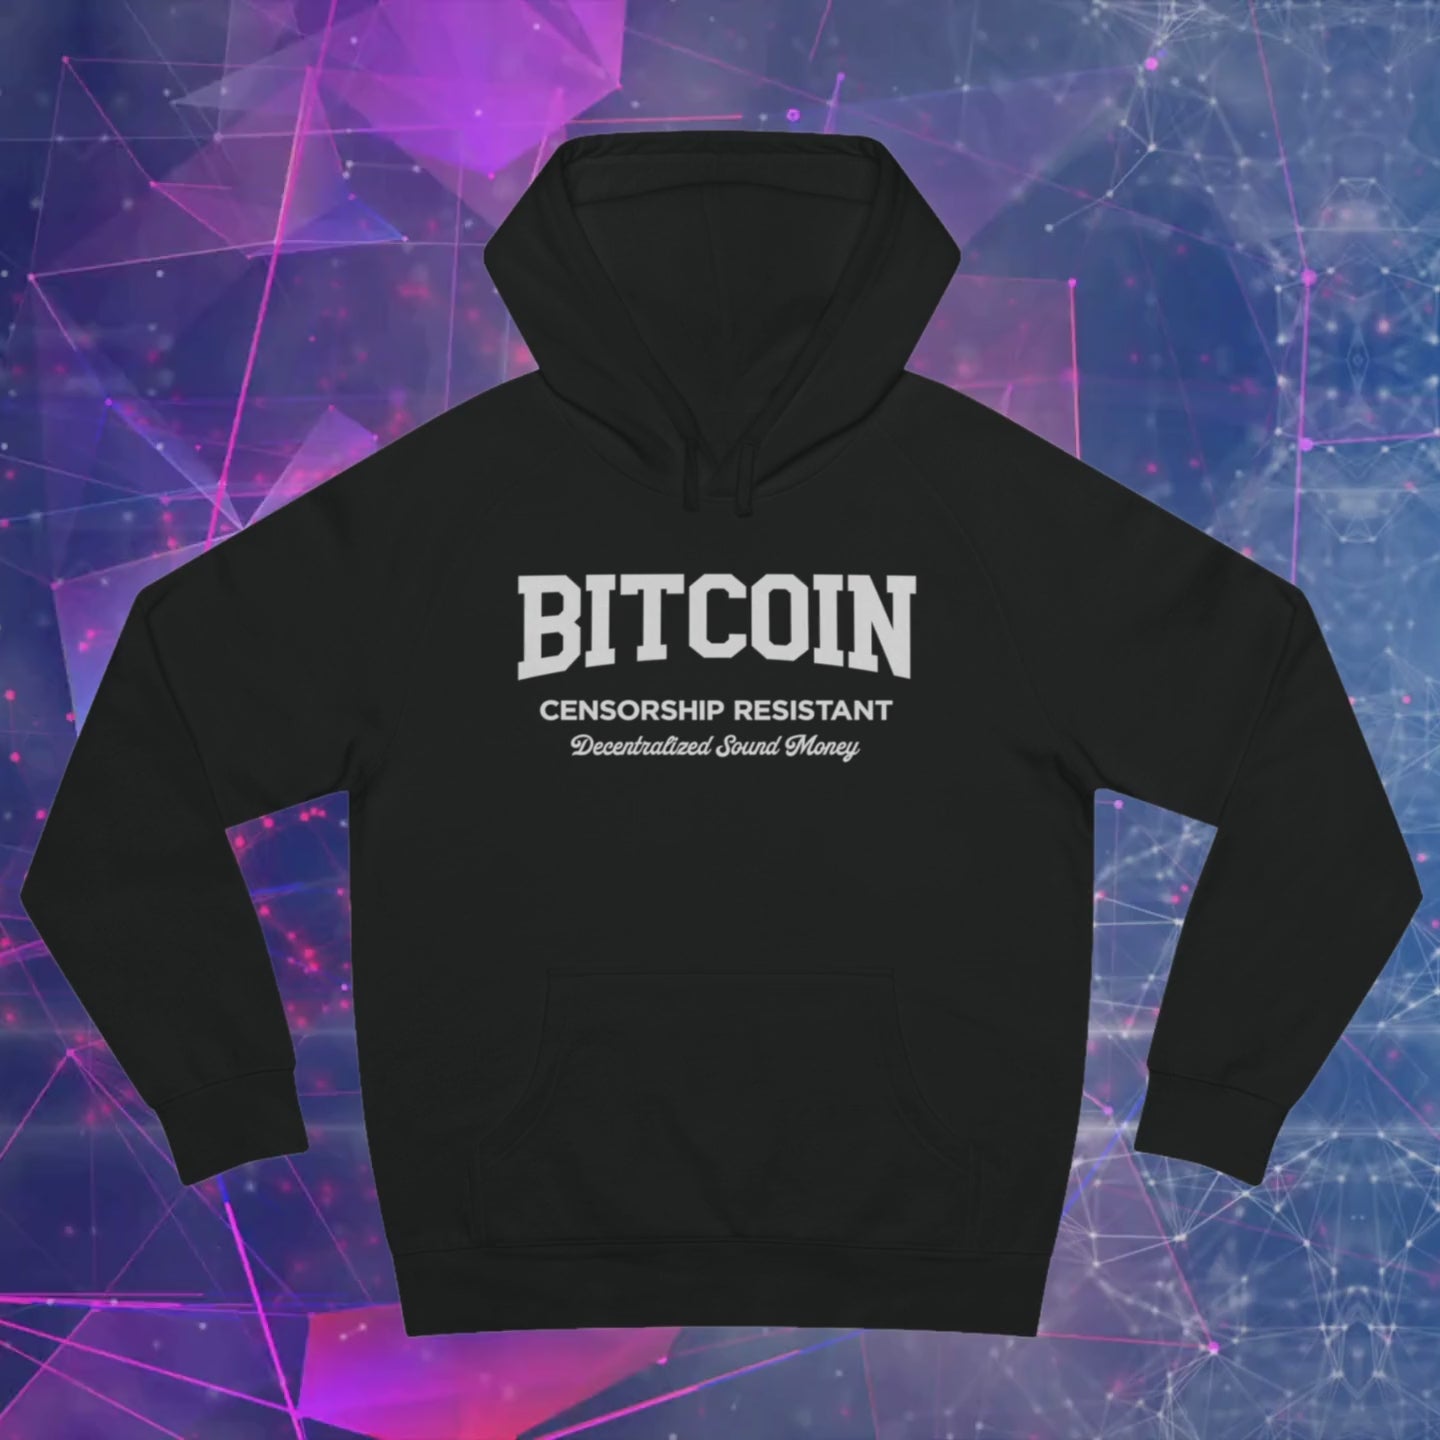 Bitcoin Apparel - Bitcoin Censorship Resistant Hoodie Video. Available at NEONCRYPTO STORE. 